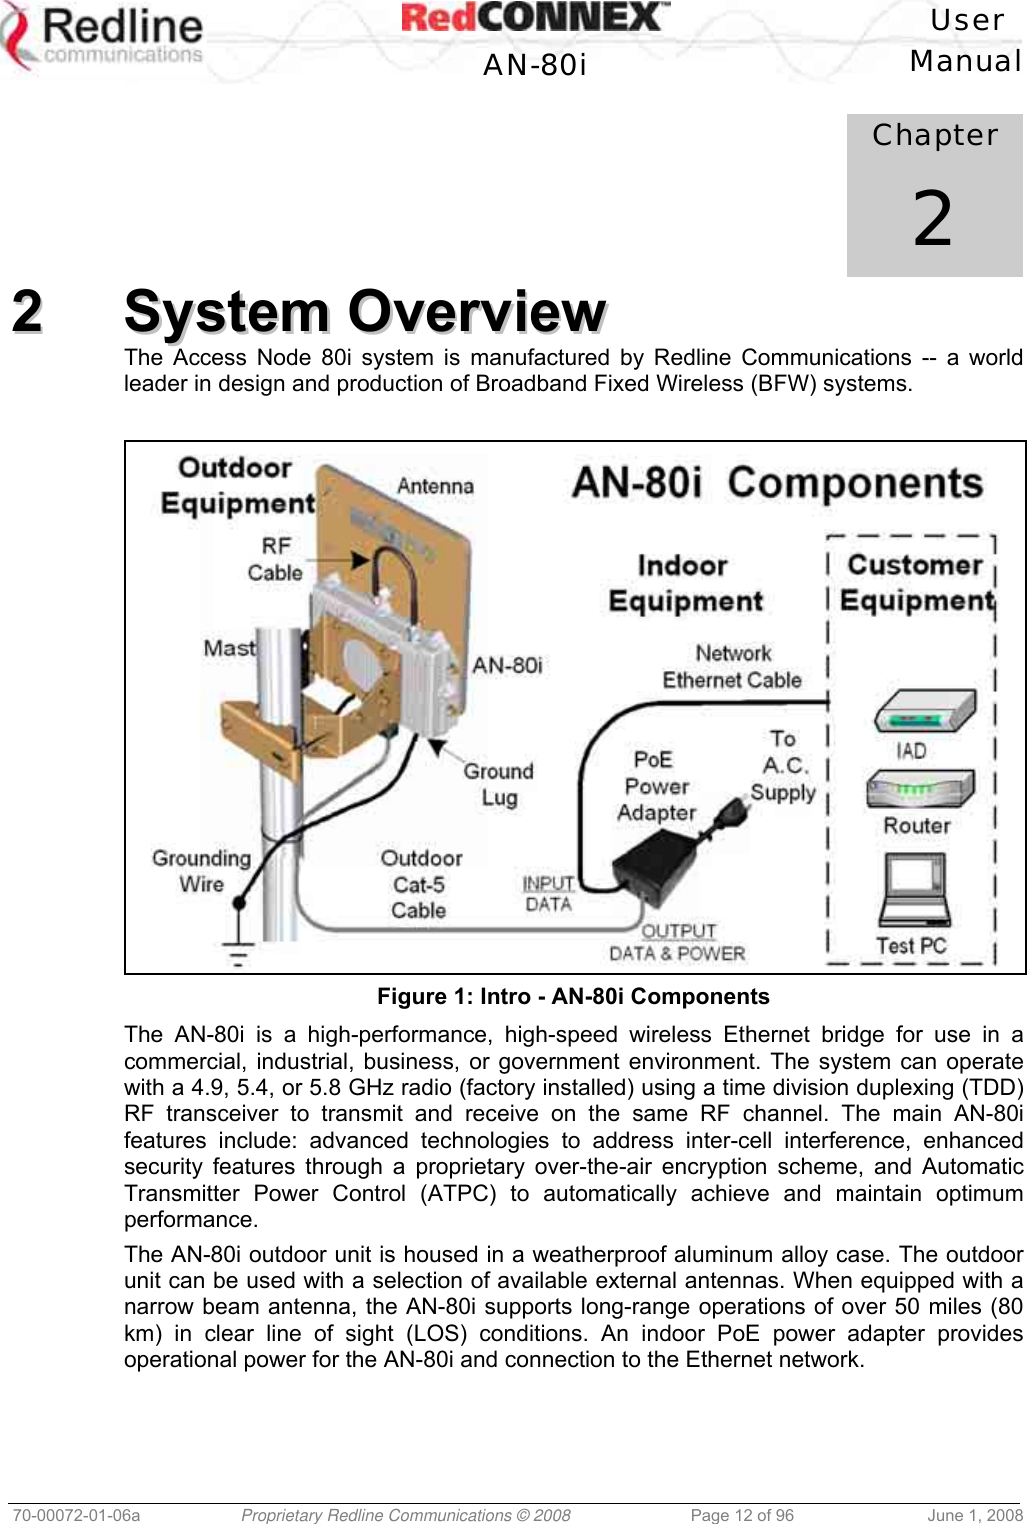   User  AN-80i Manual  70-00072-01-06a  Proprietary Redline Communications © 2008  Page 12 of 96  June 1, 2008            Chapter 2 22  SSyysstteemm  OOvveerrvviieeww  The Access Node 80i system is manufactured by Redline Communications -- a world leader in design and production of Broadband Fixed Wireless (BFW) systems.   Figure 1: Intro - AN-80i Components The AN-80i is a high-performance, high-speed wireless Ethernet bridge for use in a commercial, industrial, business, or government environment. The system can operate with a 4.9, 5.4, or 5.8 GHz radio (factory installed) using a time division duplexing (TDD) RF transceiver to transmit and receive on the same RF channel. The main AN-80i features include: advanced technologies to address inter-cell interference, enhanced security features through a proprietary over-the-air encryption scheme, and Automatic Transmitter Power Control (ATPC) to automatically achieve and maintain optimum performance. The AN-80i outdoor unit is housed in a weatherproof aluminum alloy case. The outdoor unit can be used with a selection of available external antennas. When equipped with a narrow beam antenna, the AN-80i supports long-range operations of over 50 miles (80 km) in clear line of sight (LOS) conditions. An indoor PoE power adapter provides operational power for the AN-80i and connection to the Ethernet network. 